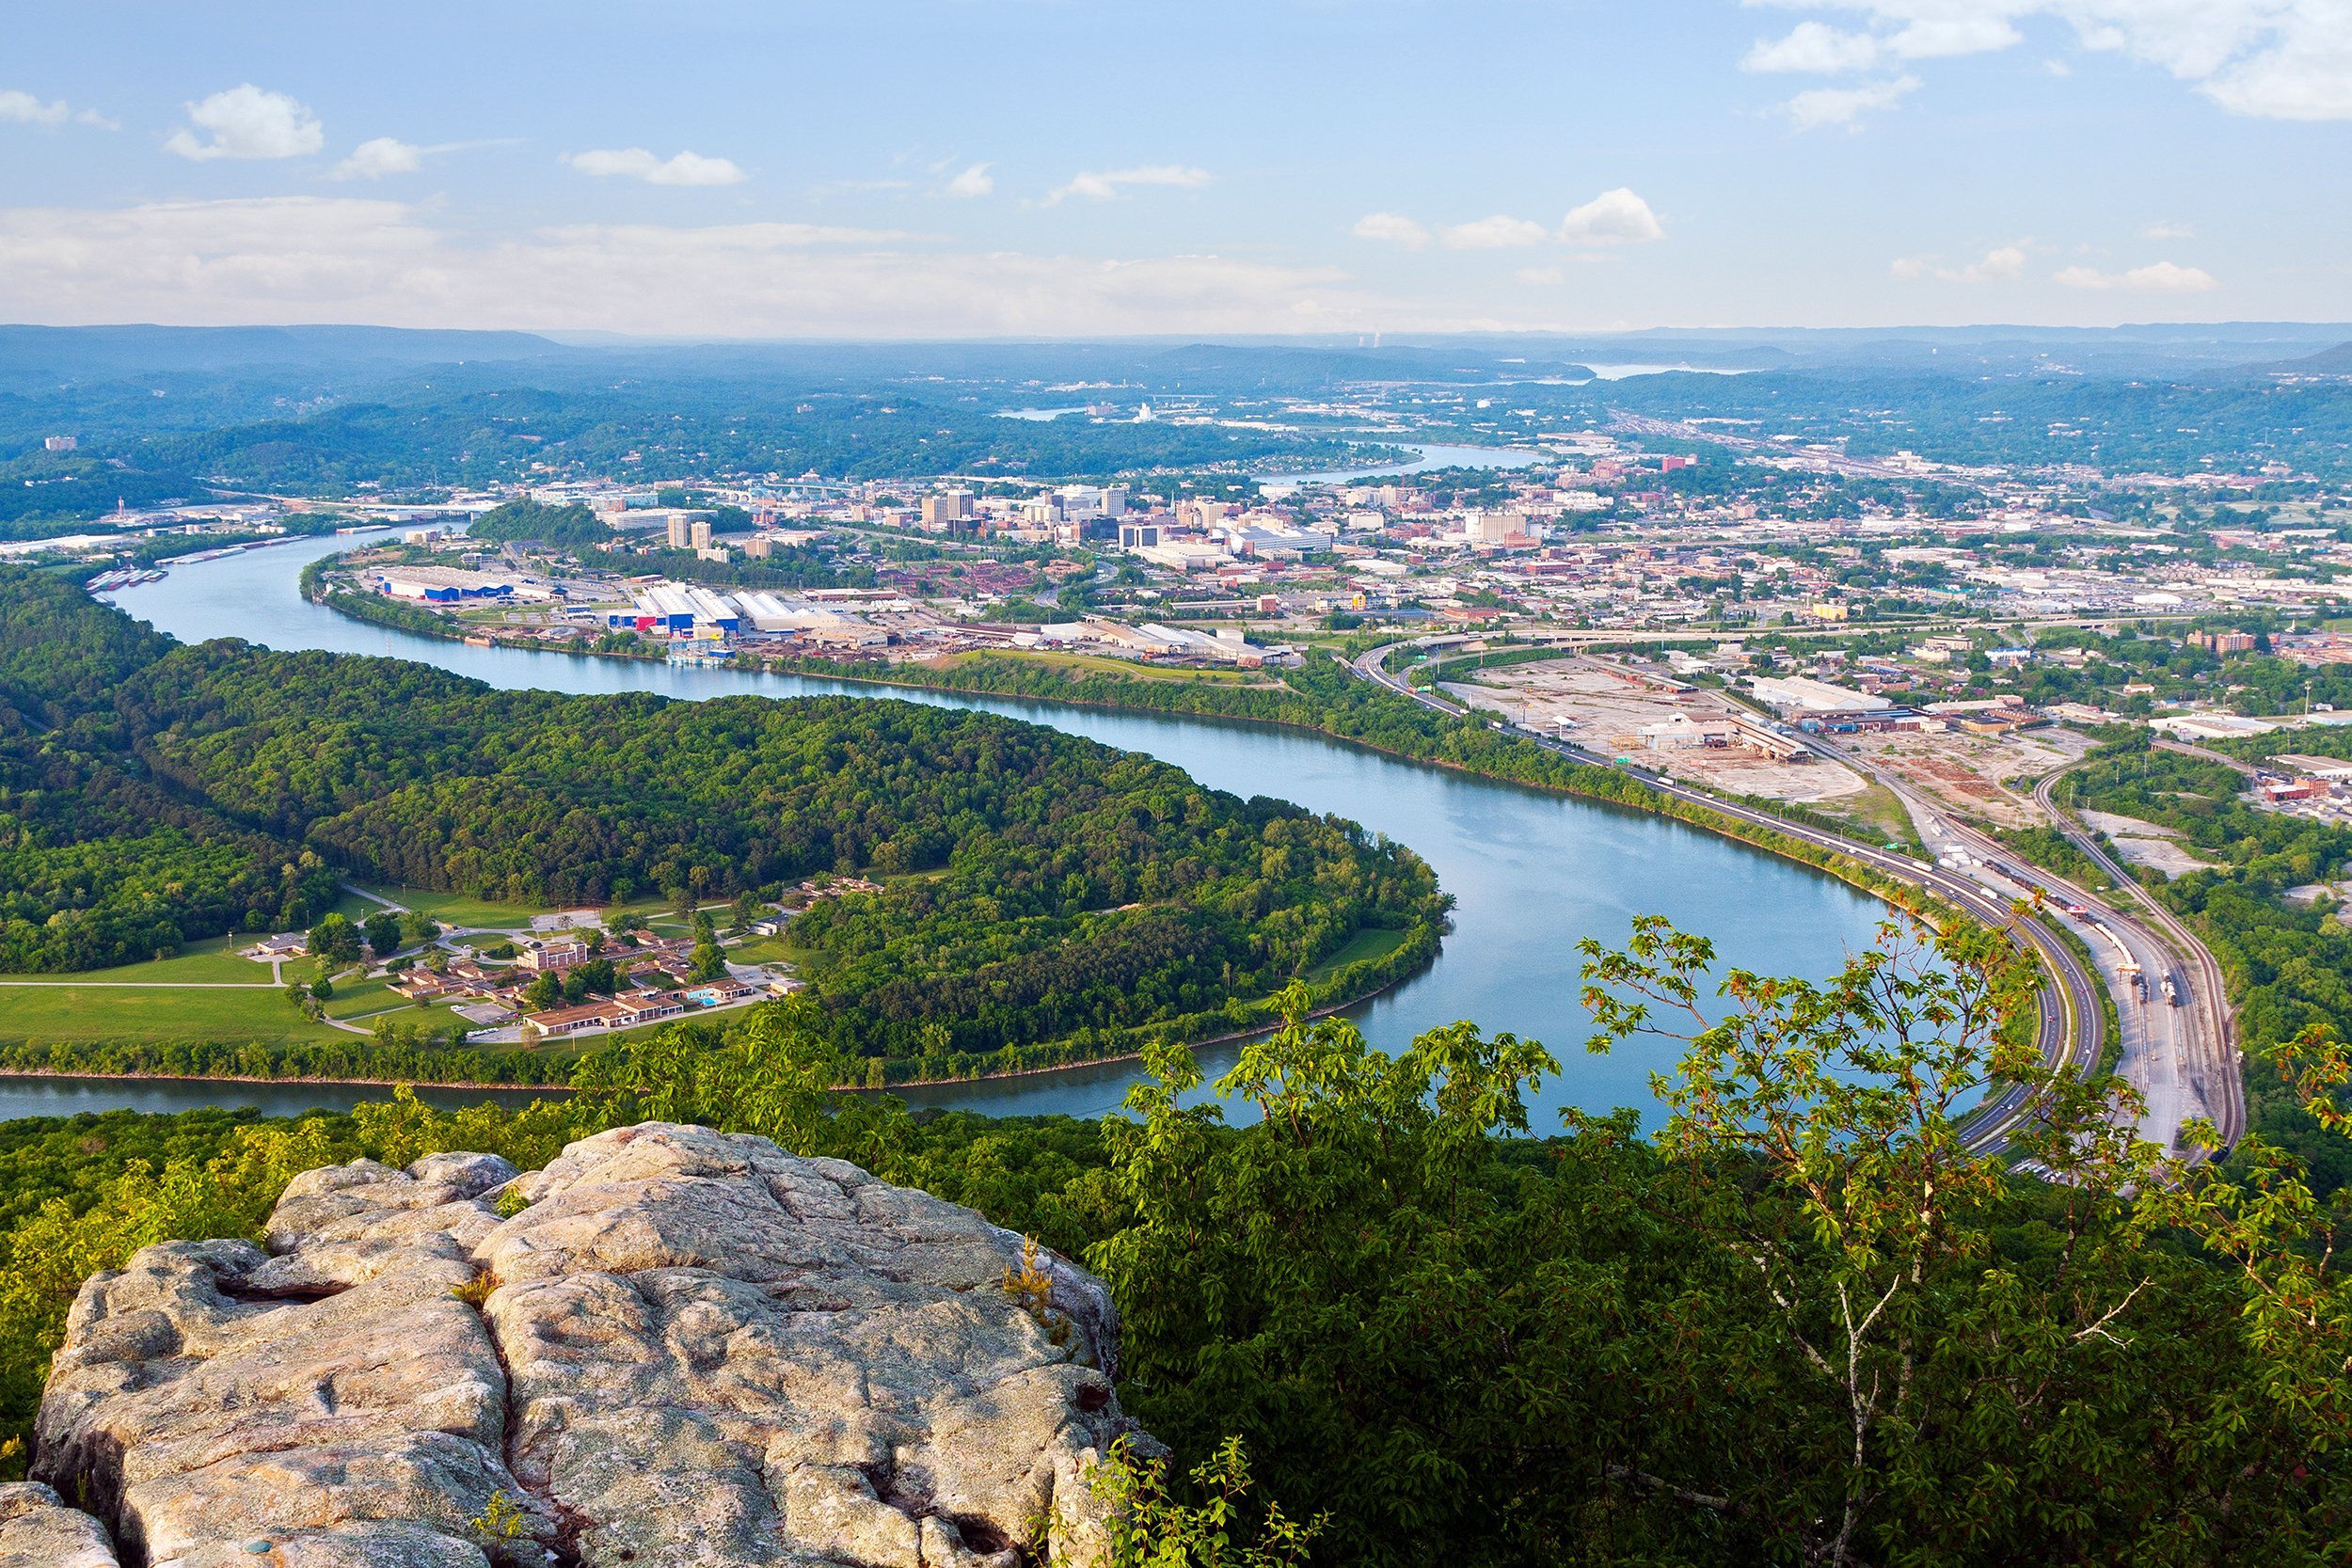 <p>Detach from technology and unwind by riding horses or with rock-climbing or hiking Lookout Mountain (there's also a train up). An under-the-radar destination that's experiencing a renaissance, Chattanooga also has great restaurants and bars to check out.</p>